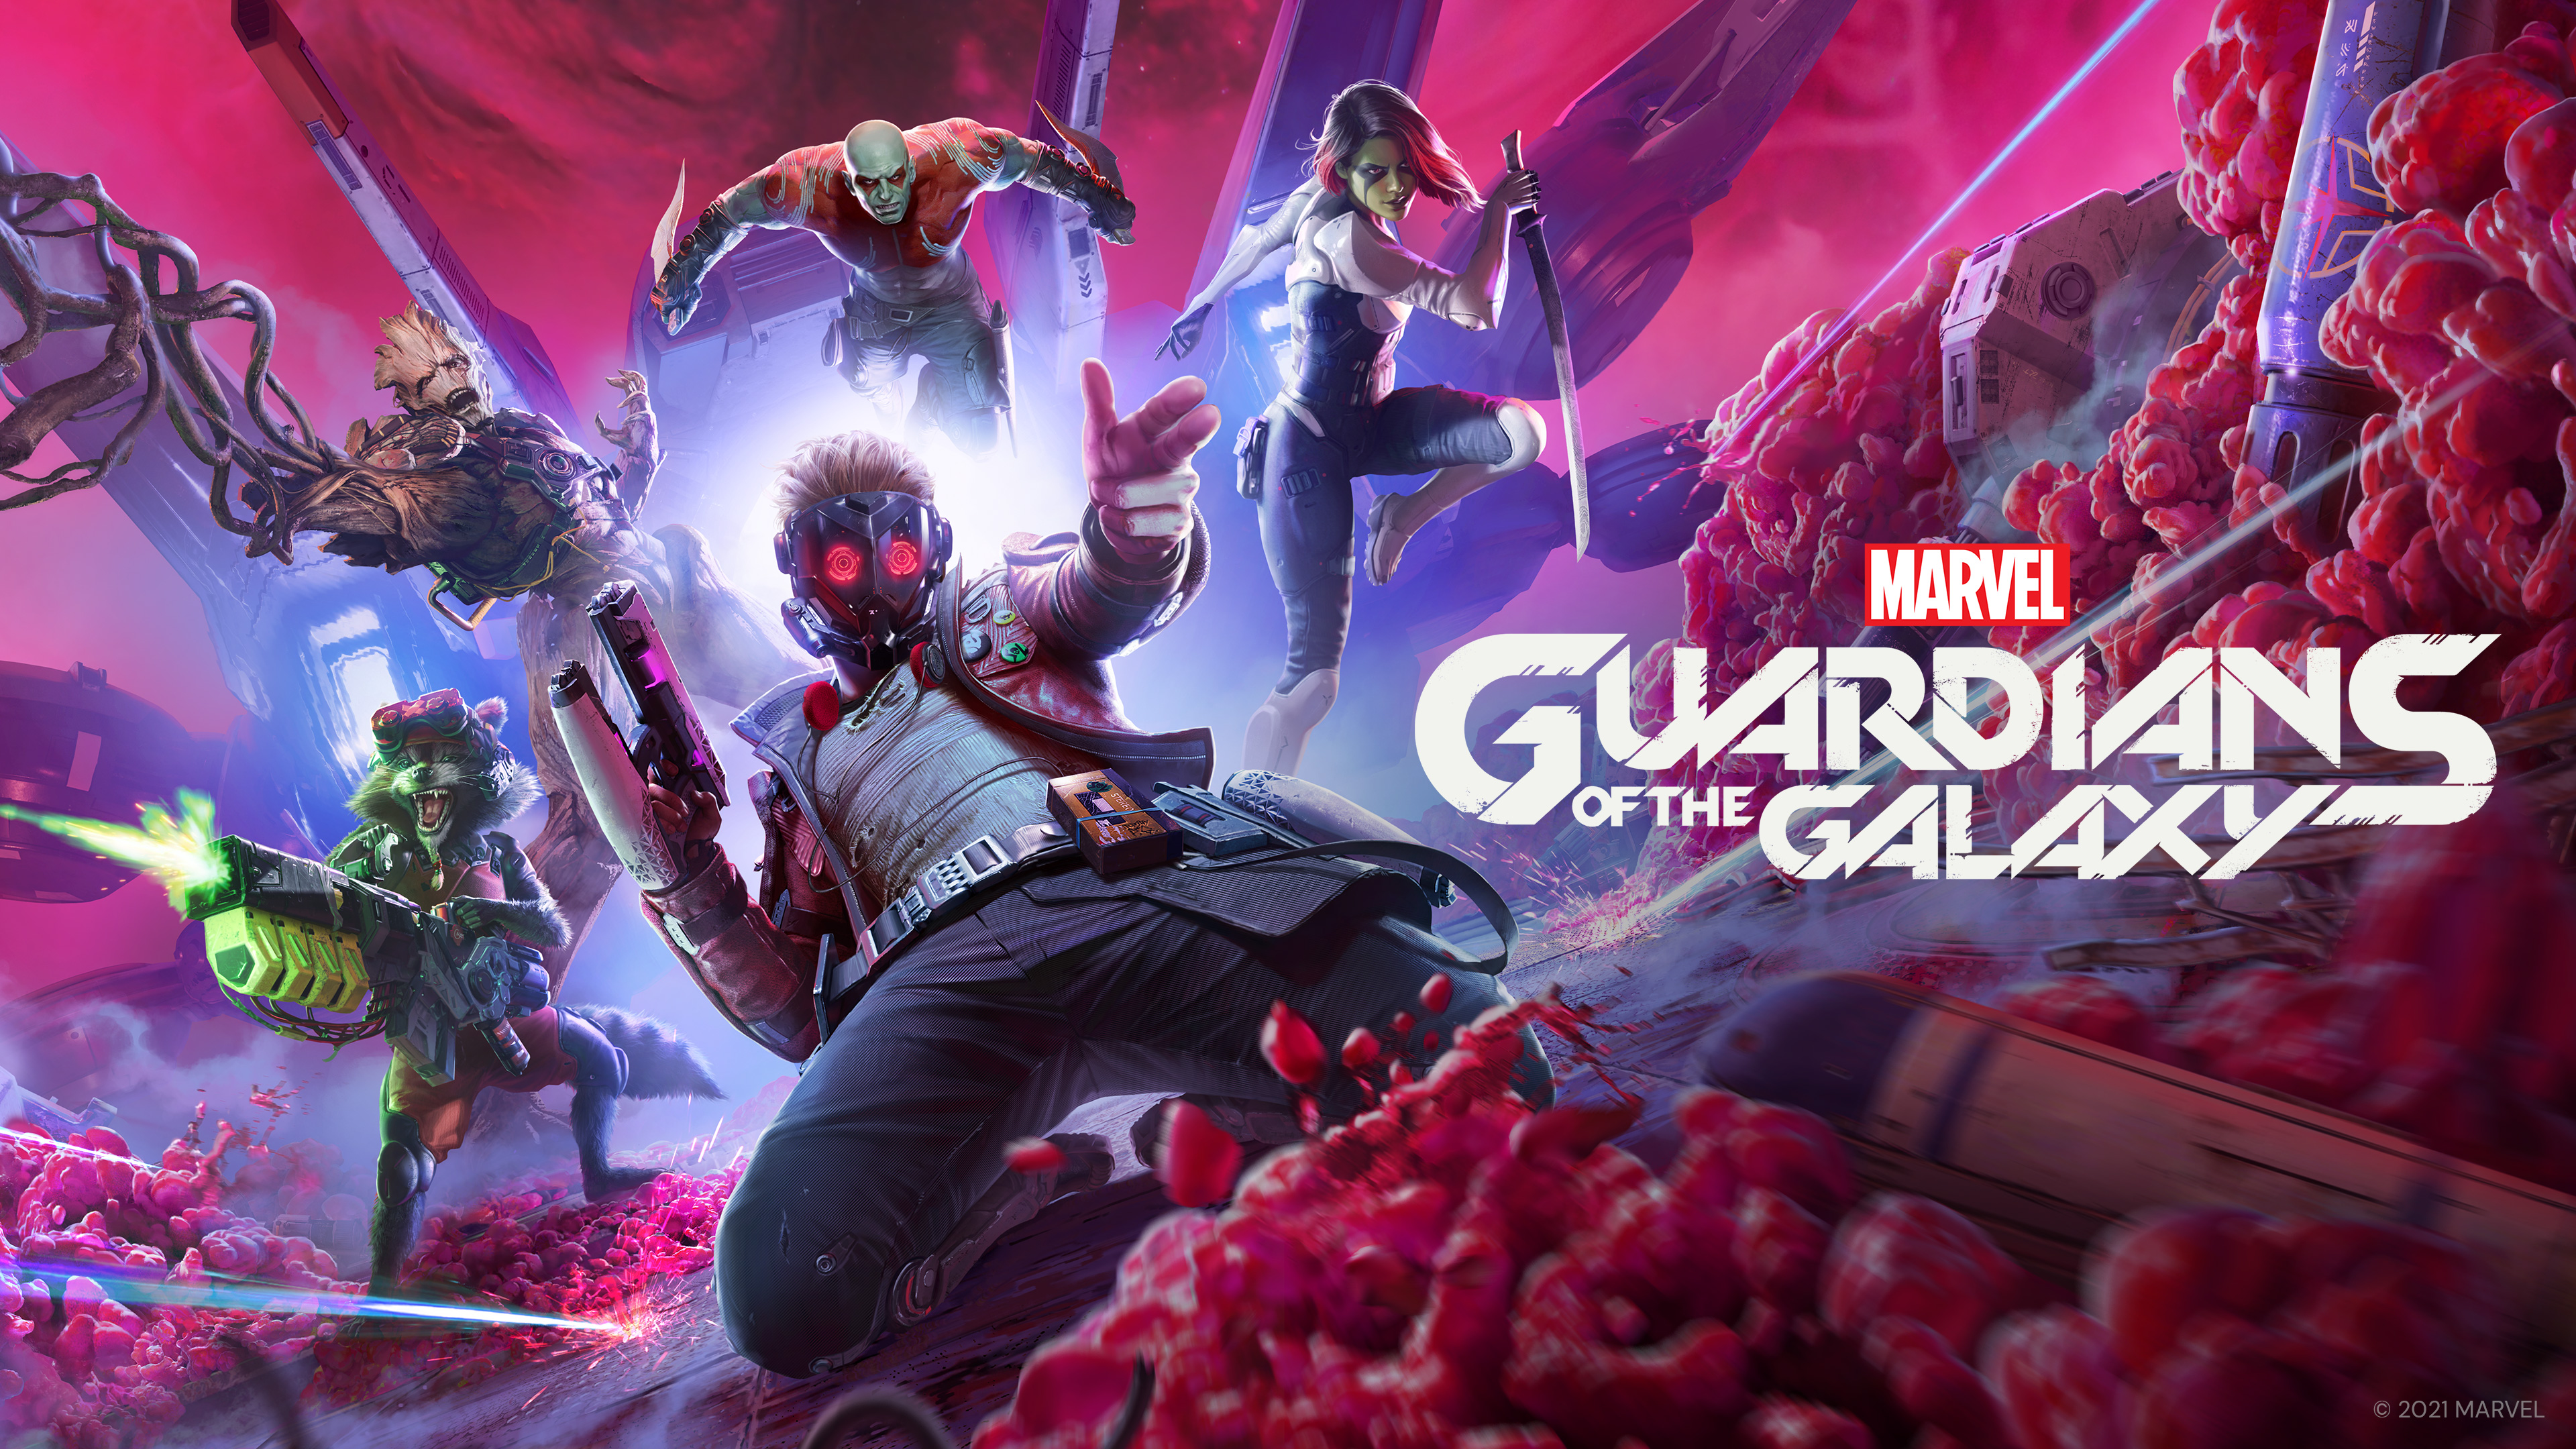 Guardians Of The Galaxy Game Marvel Comics Star Lord Gamora Drax The Destroyer Groot Rocket Raccoon  3840x2160